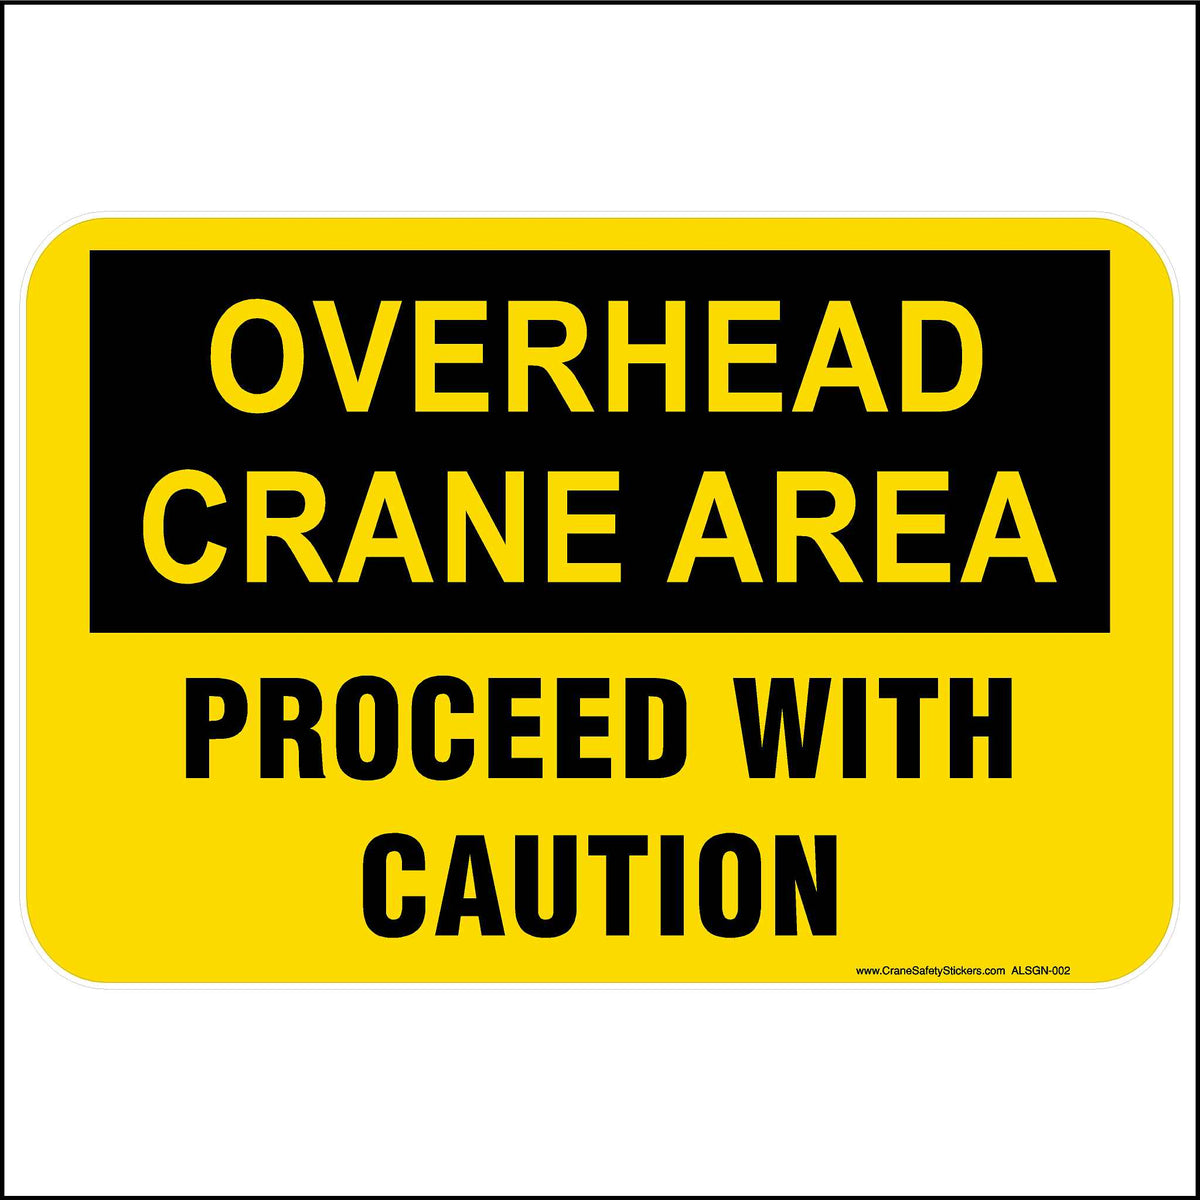 Aluminum Crane Safety Sign Overhead Crane Area Proceed With Caution.